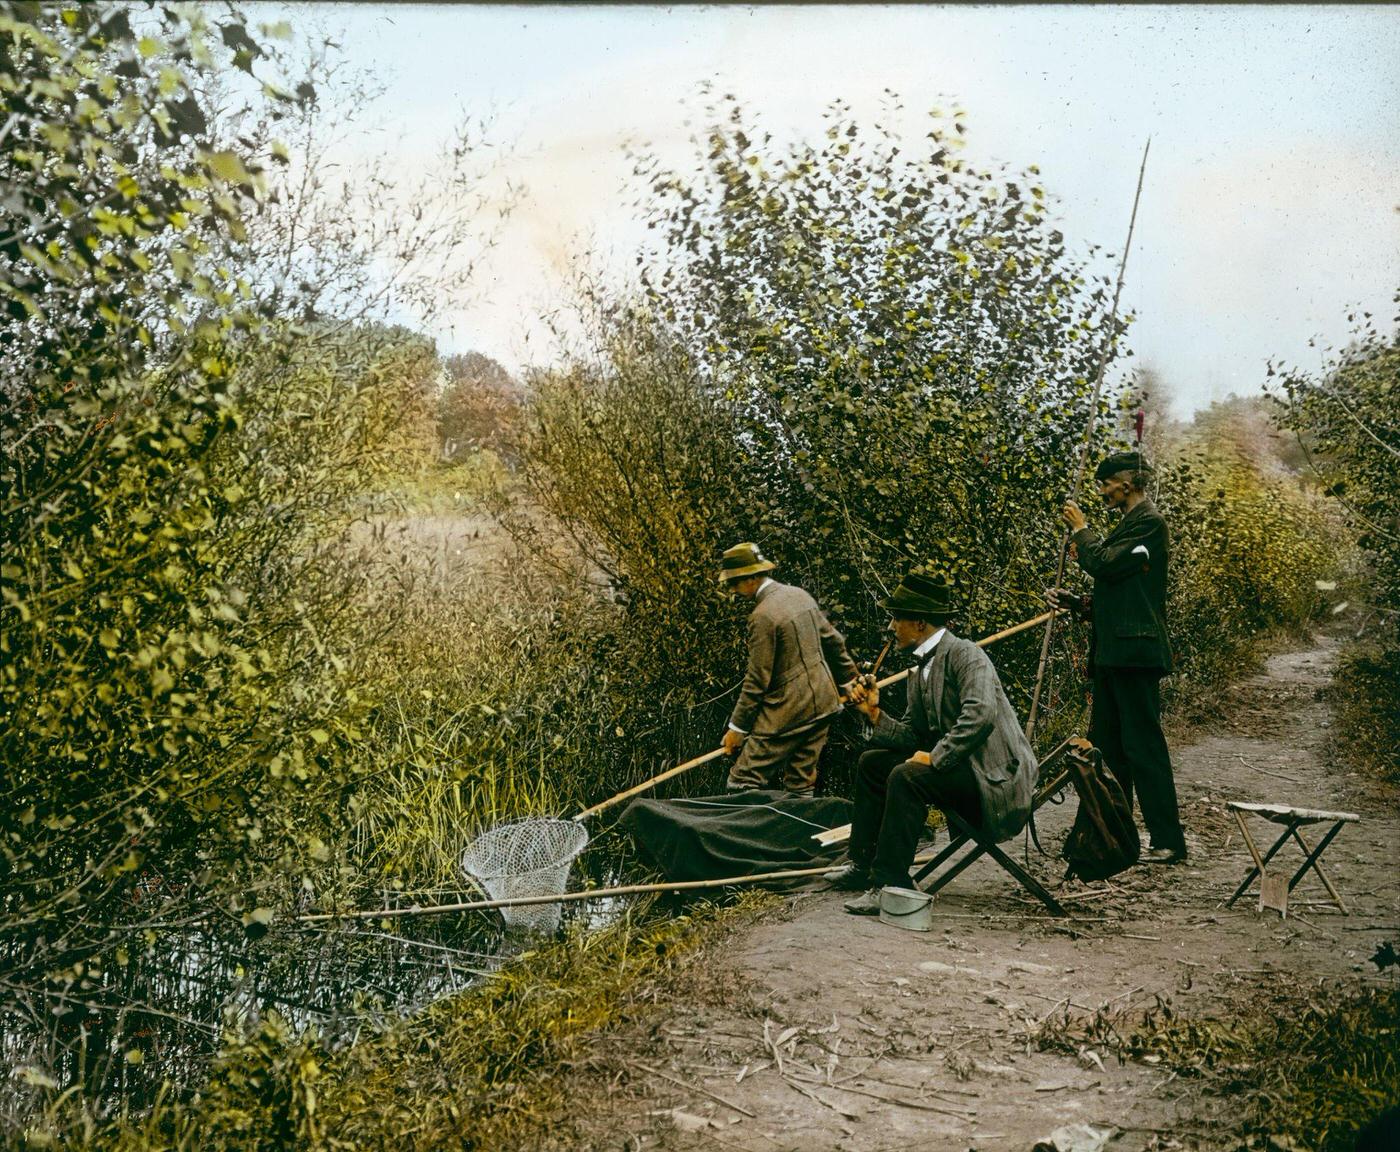 Fishermen angling in the Viennese Prater. Green Prater, 1905.